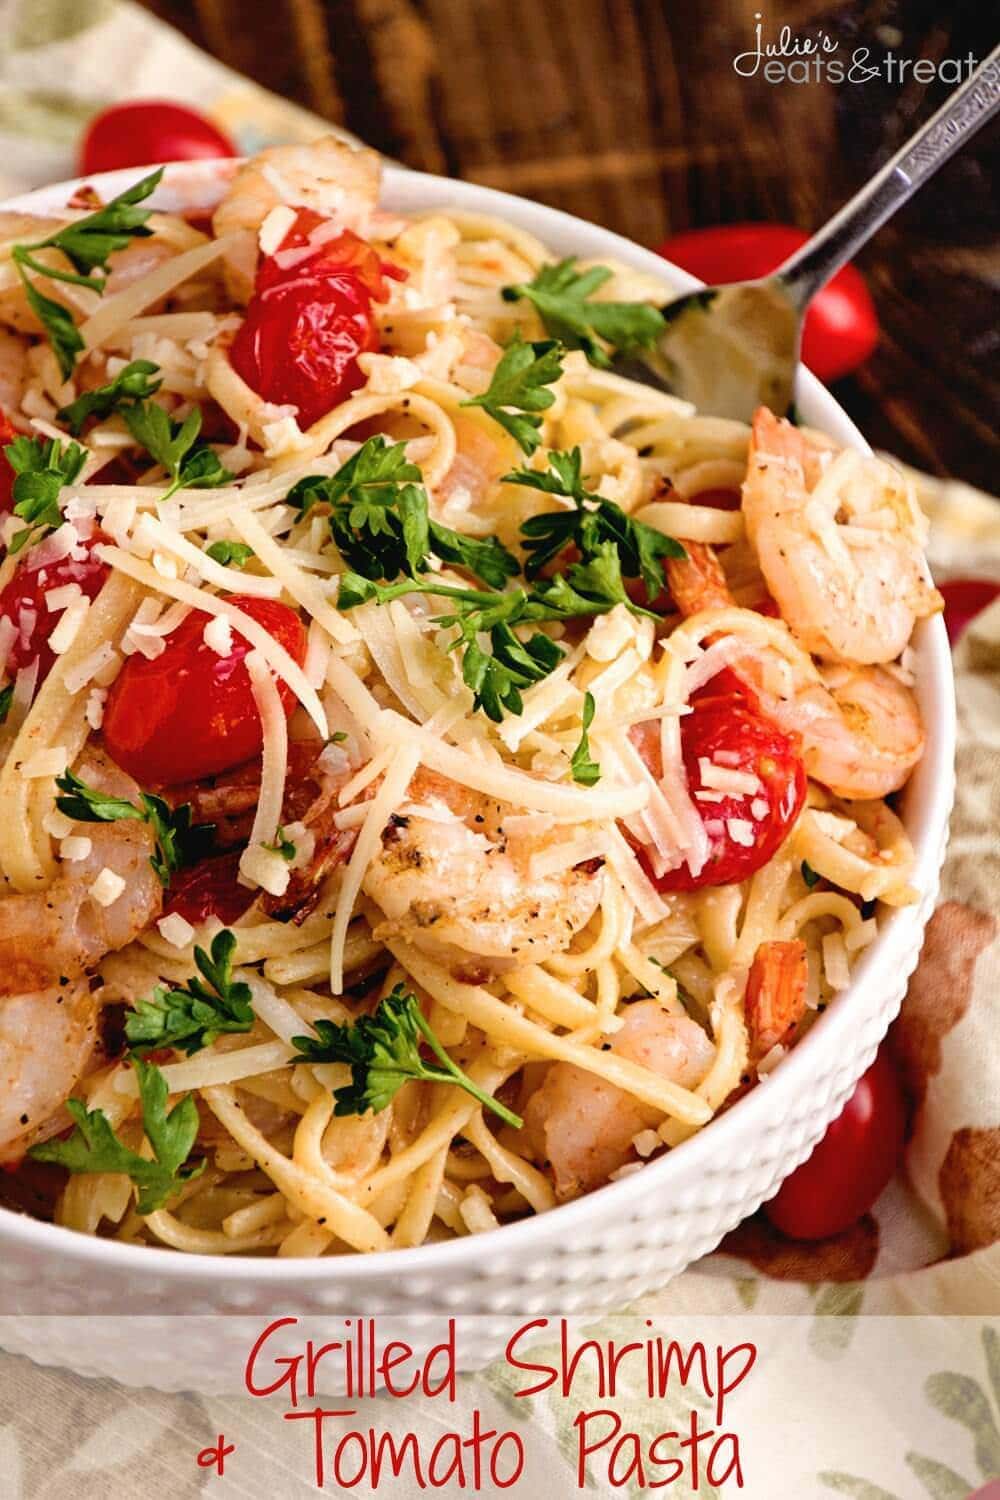 Grilled Shrimp & Tomato Pasta ~ Quick and Delicious Pasta Recipe Loaded with Seasoned Shrimp, Cherry Tomatoes and Parmesan Cheese!